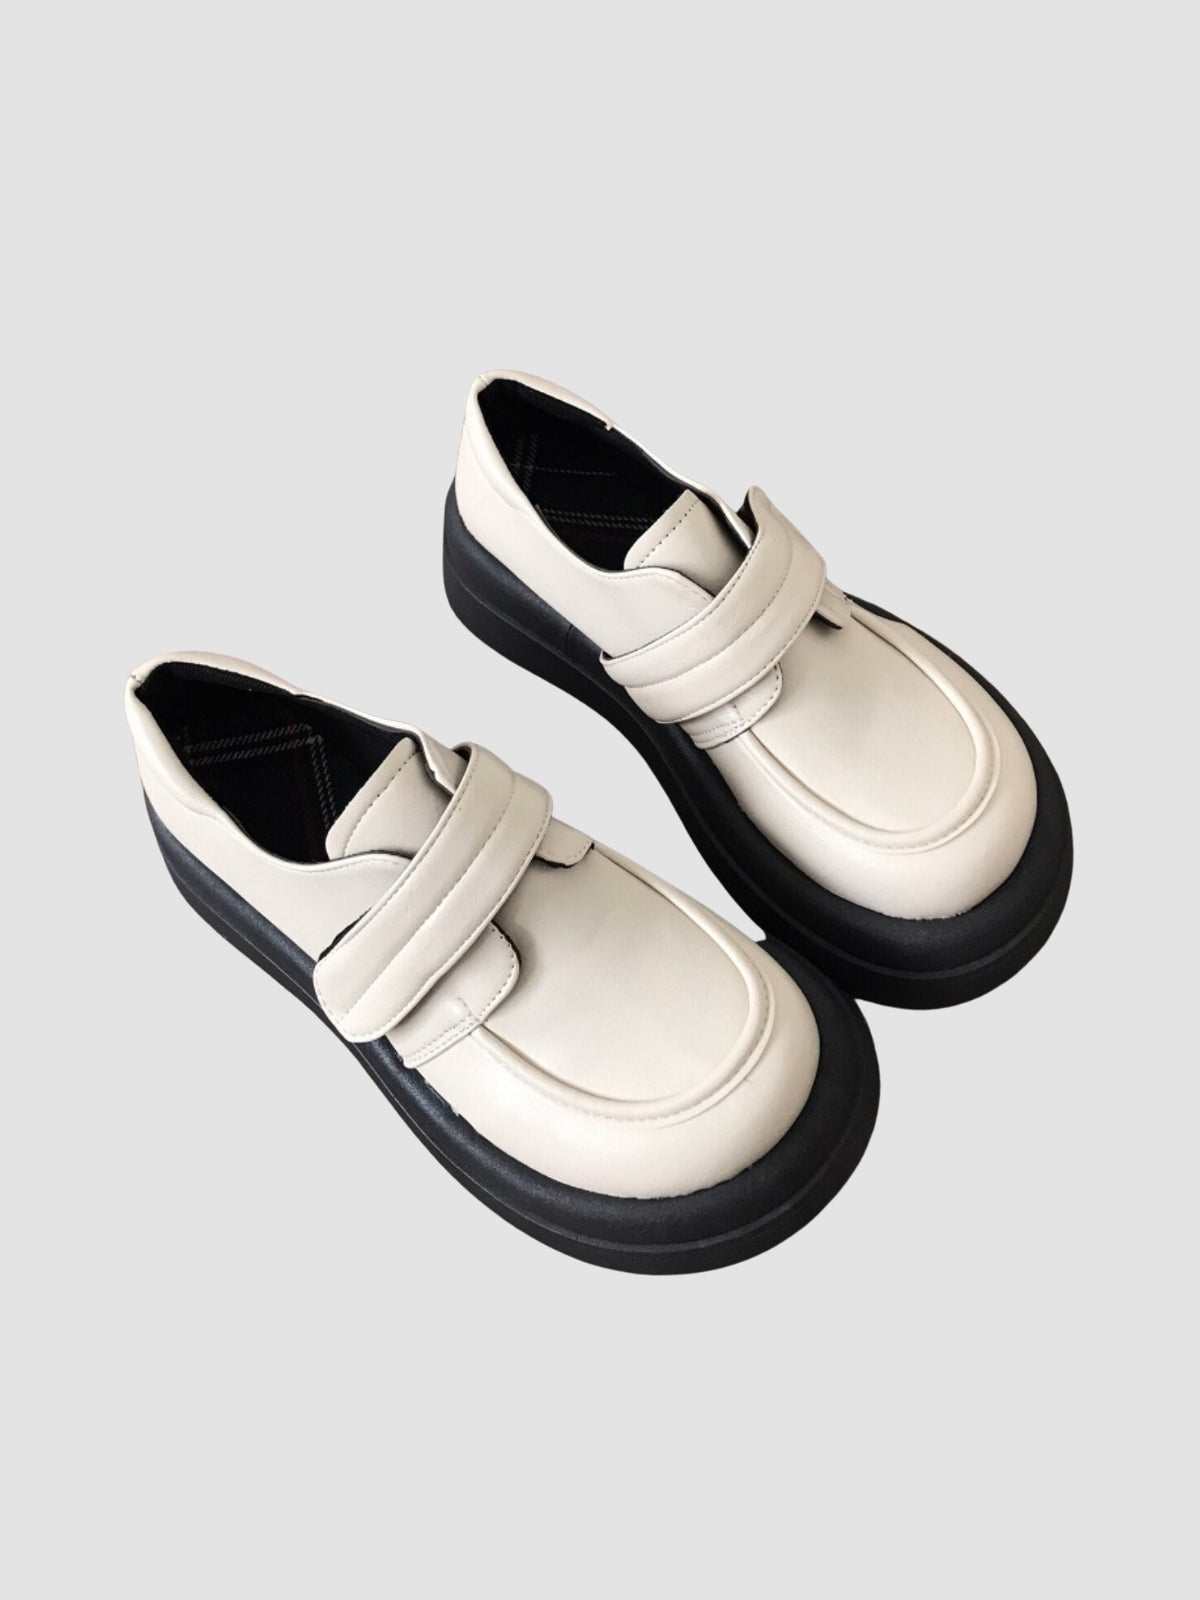 WLS Thick Soled Leather Women Shoes